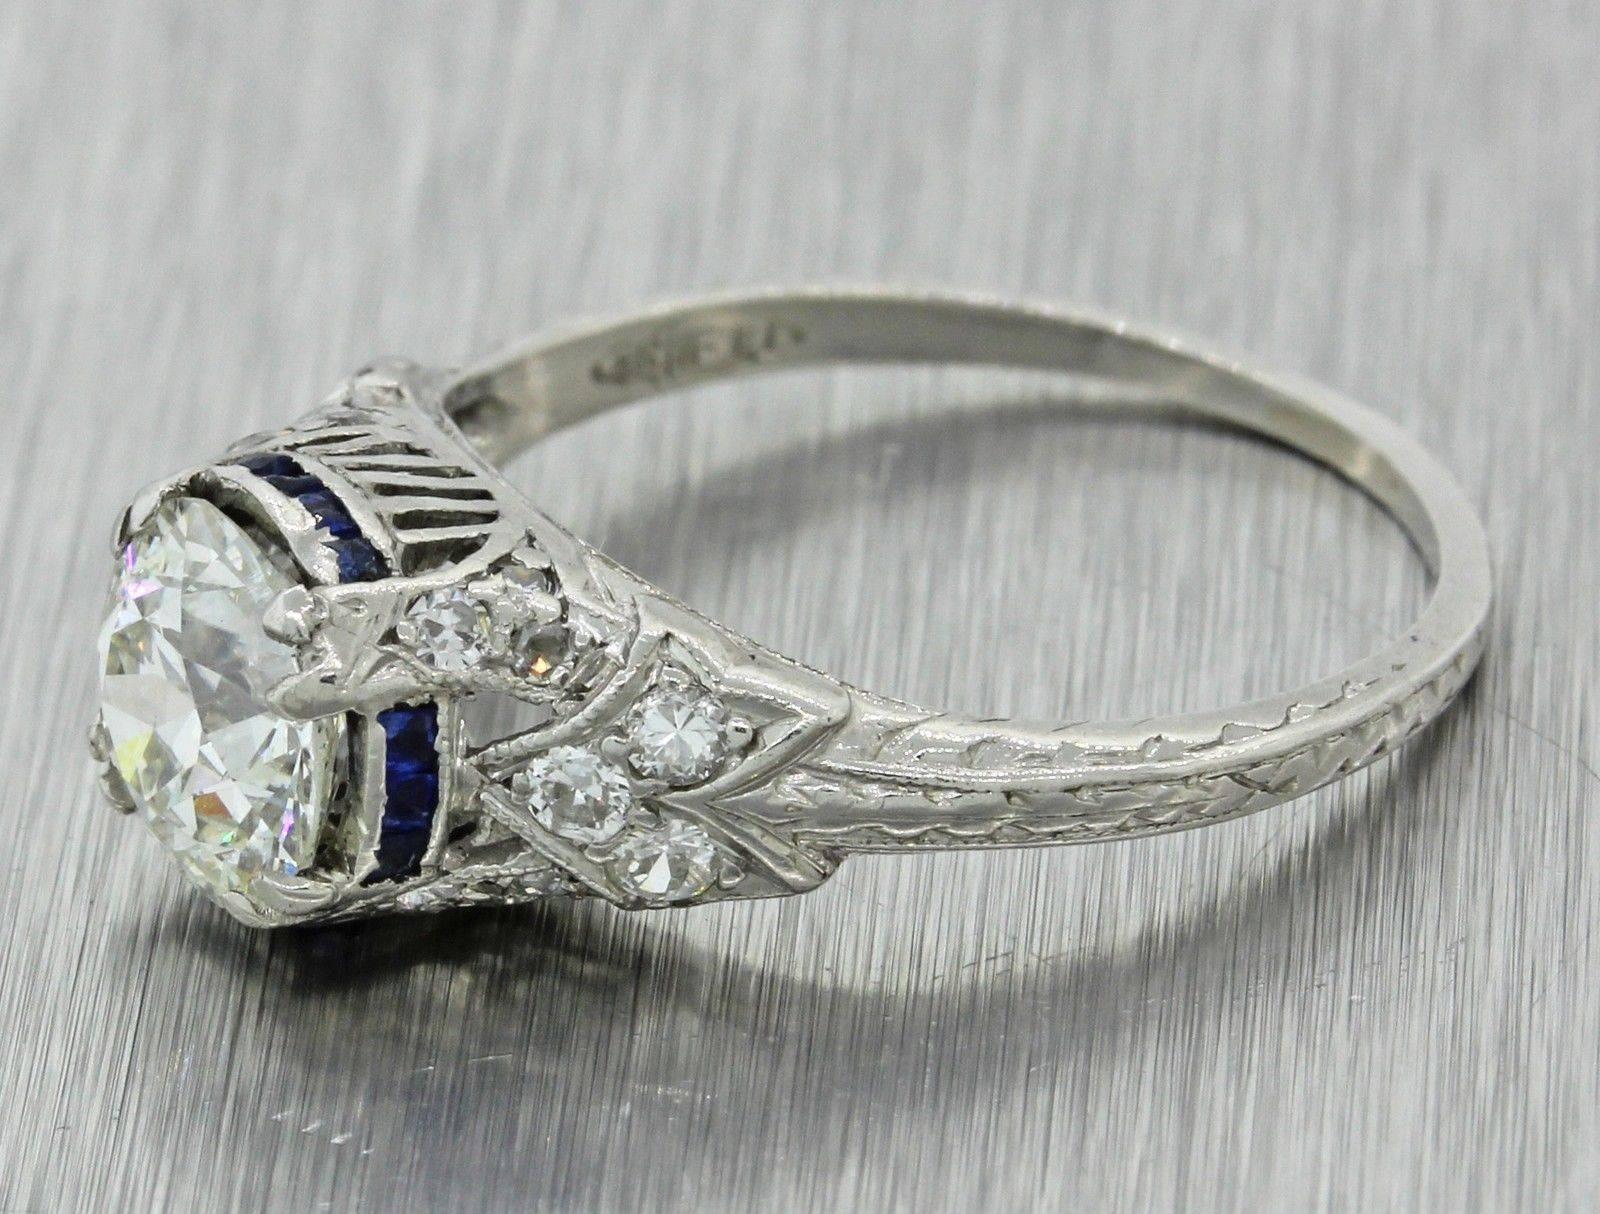 This is a beautiful 1920s Antique Art Deco Platinum 1.46ctw Diamond Sapphire Engagement Ring EGL. It has been certified by EGL and will come with the certificate. It will come in a lovely ring box for a perfect presentation and our unconditional 30